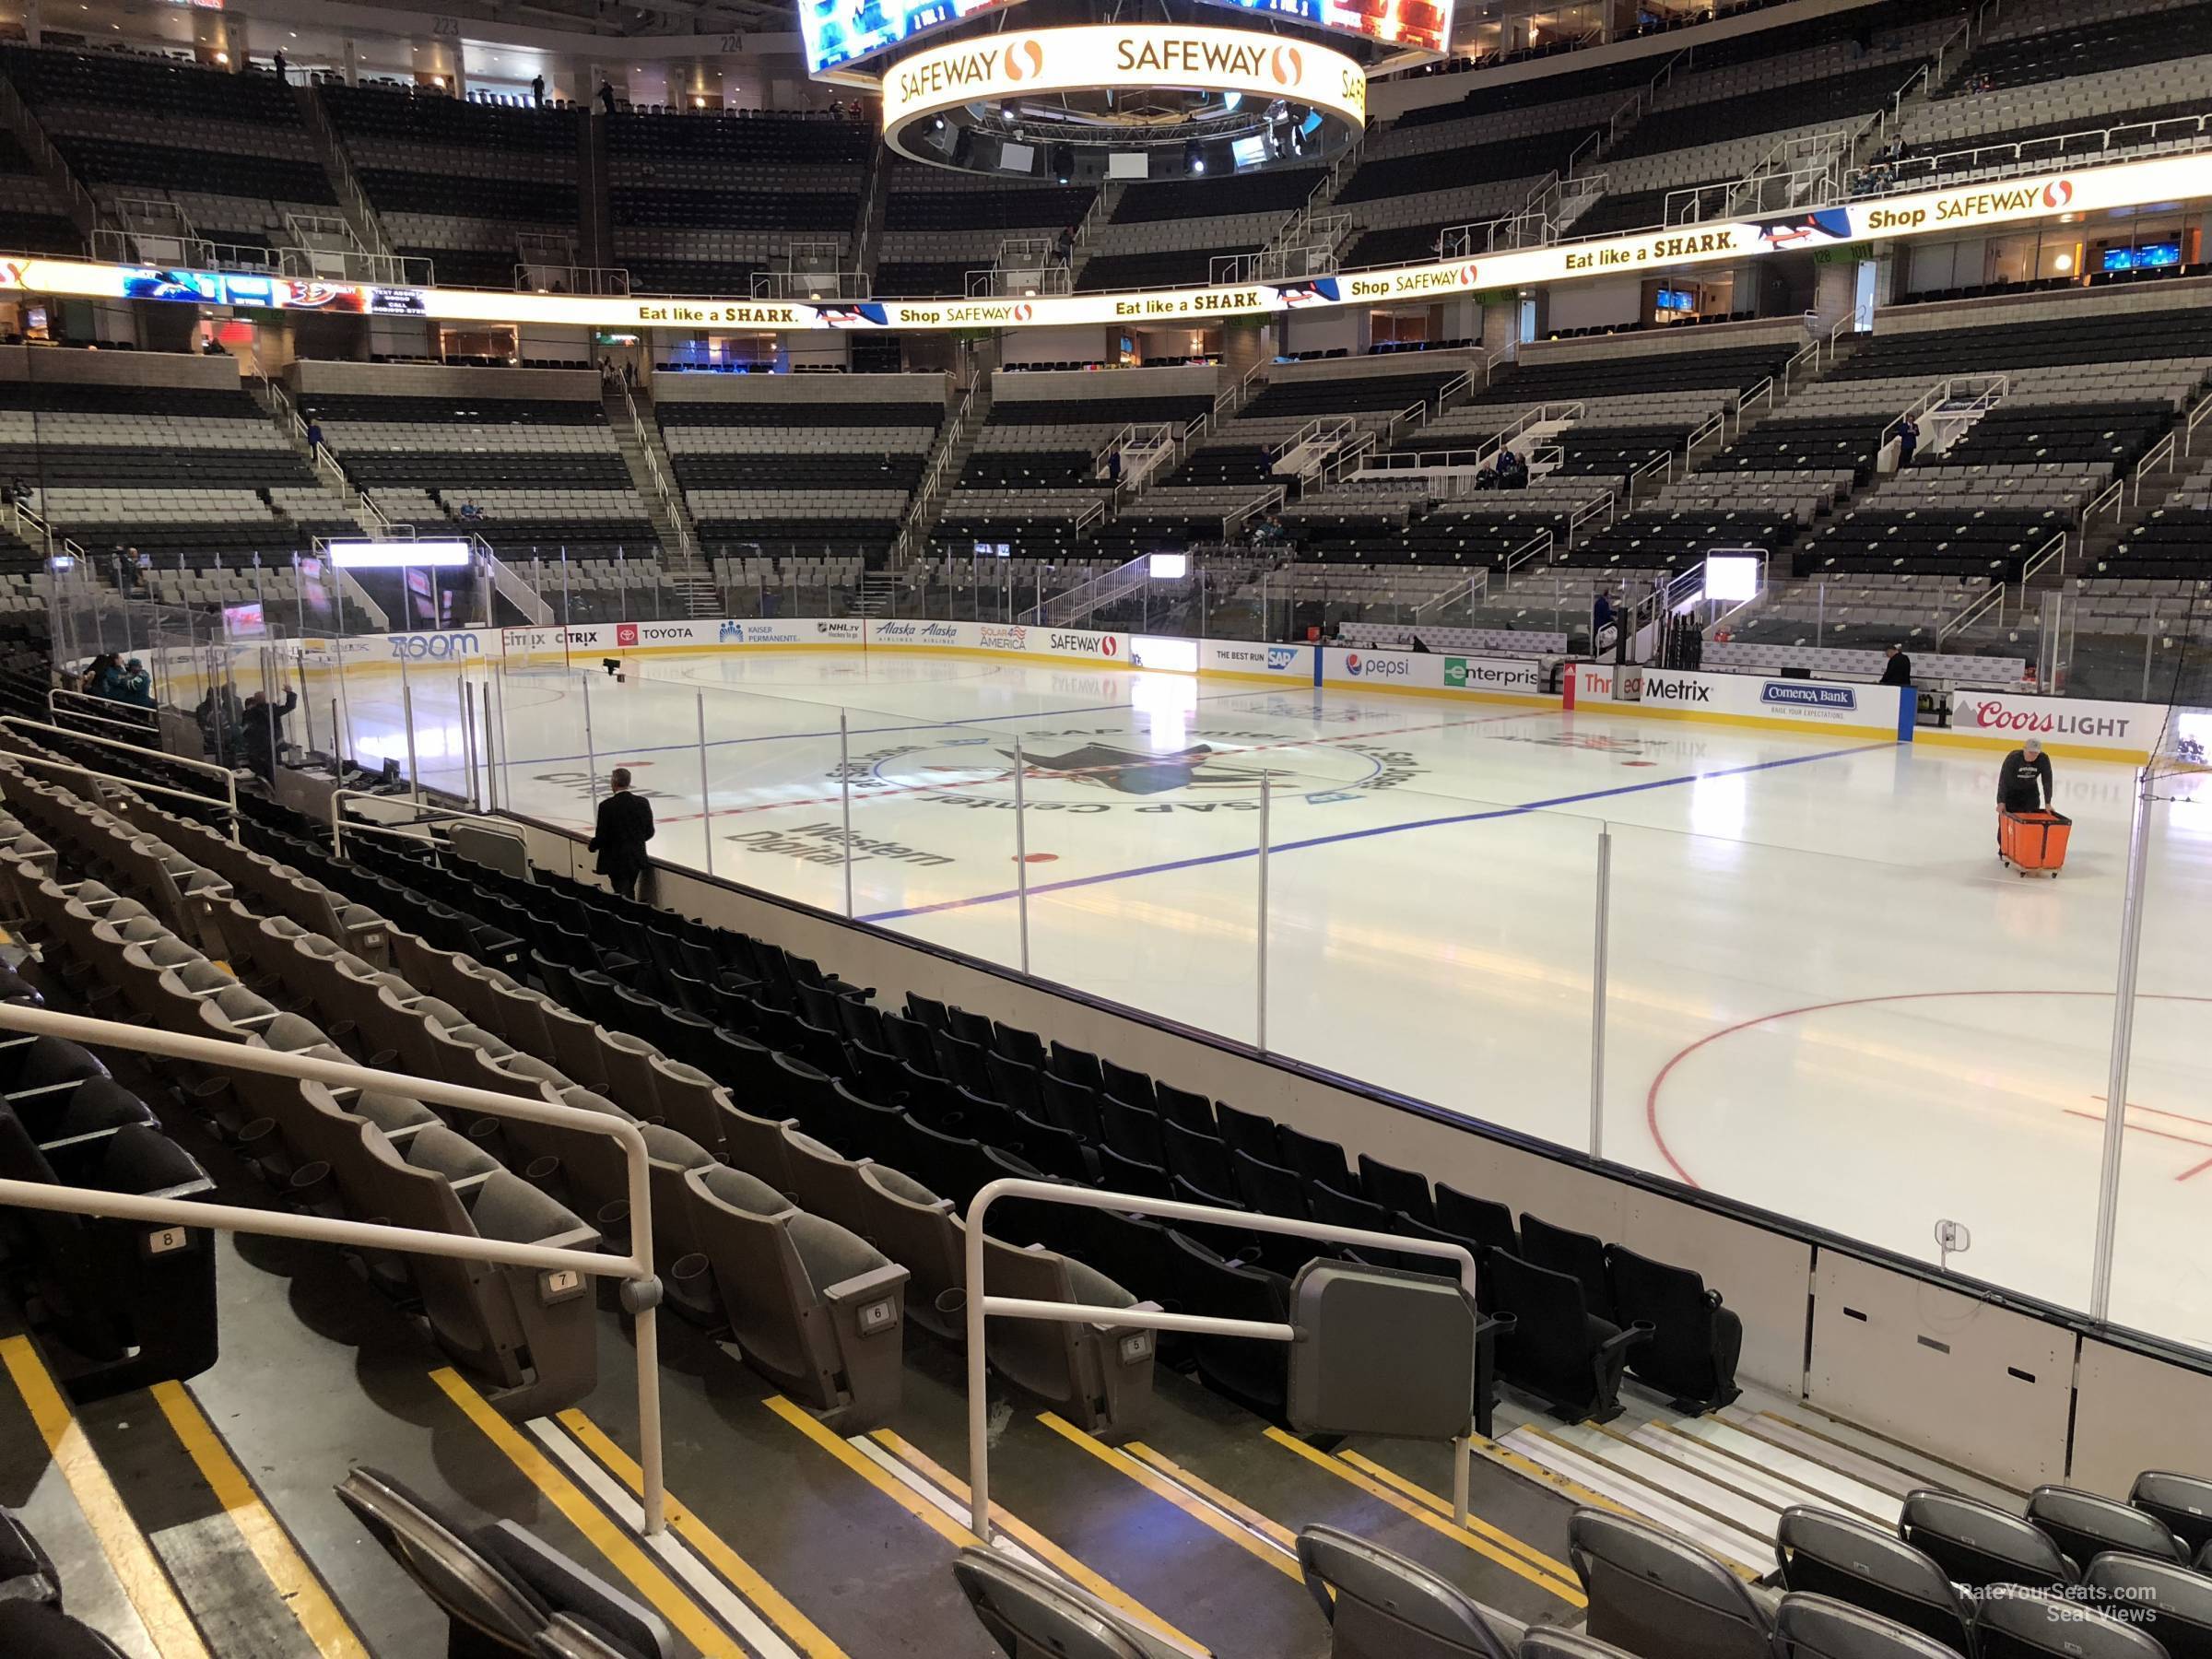 section 113, row 10 seat view  for hockey - sap center